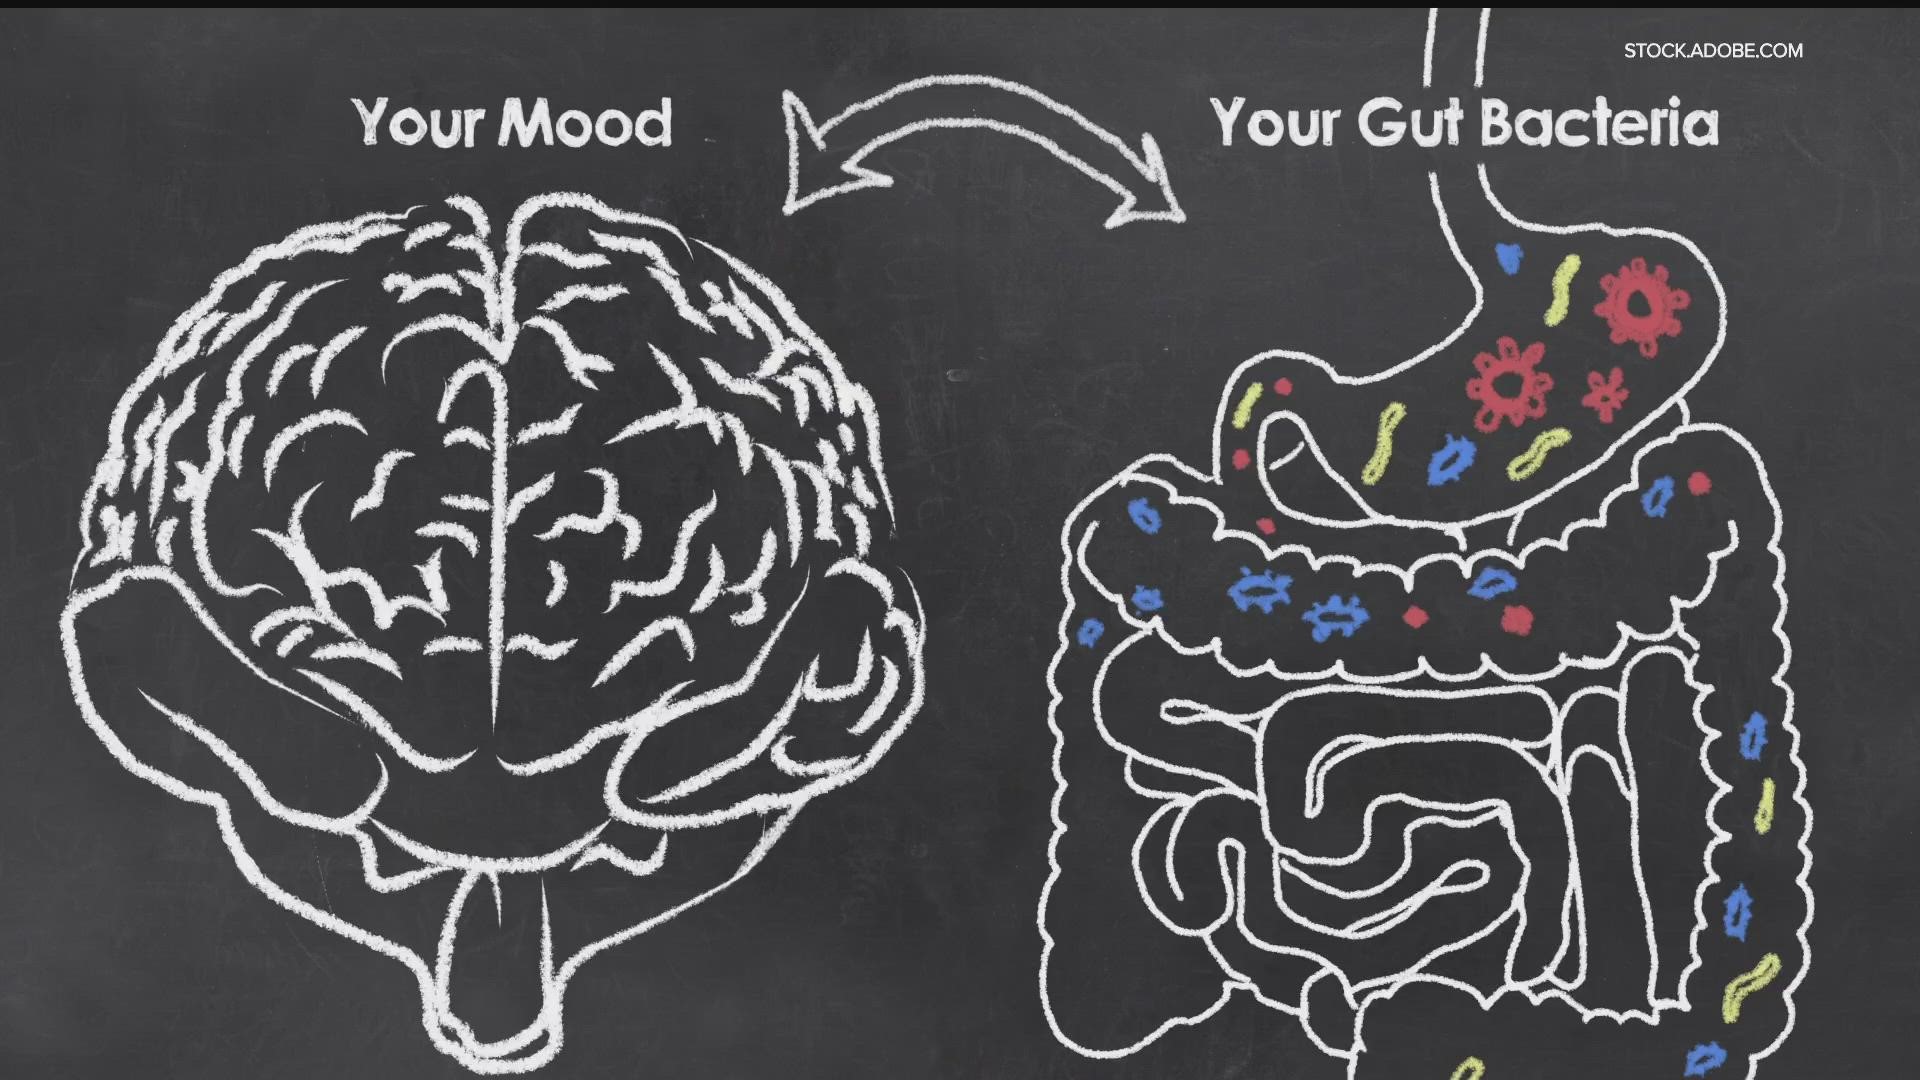 Every part of our bodies is interconnected, so it should come as no surprise that if you take care of your gut, it will have an impact on your brain. But how much?